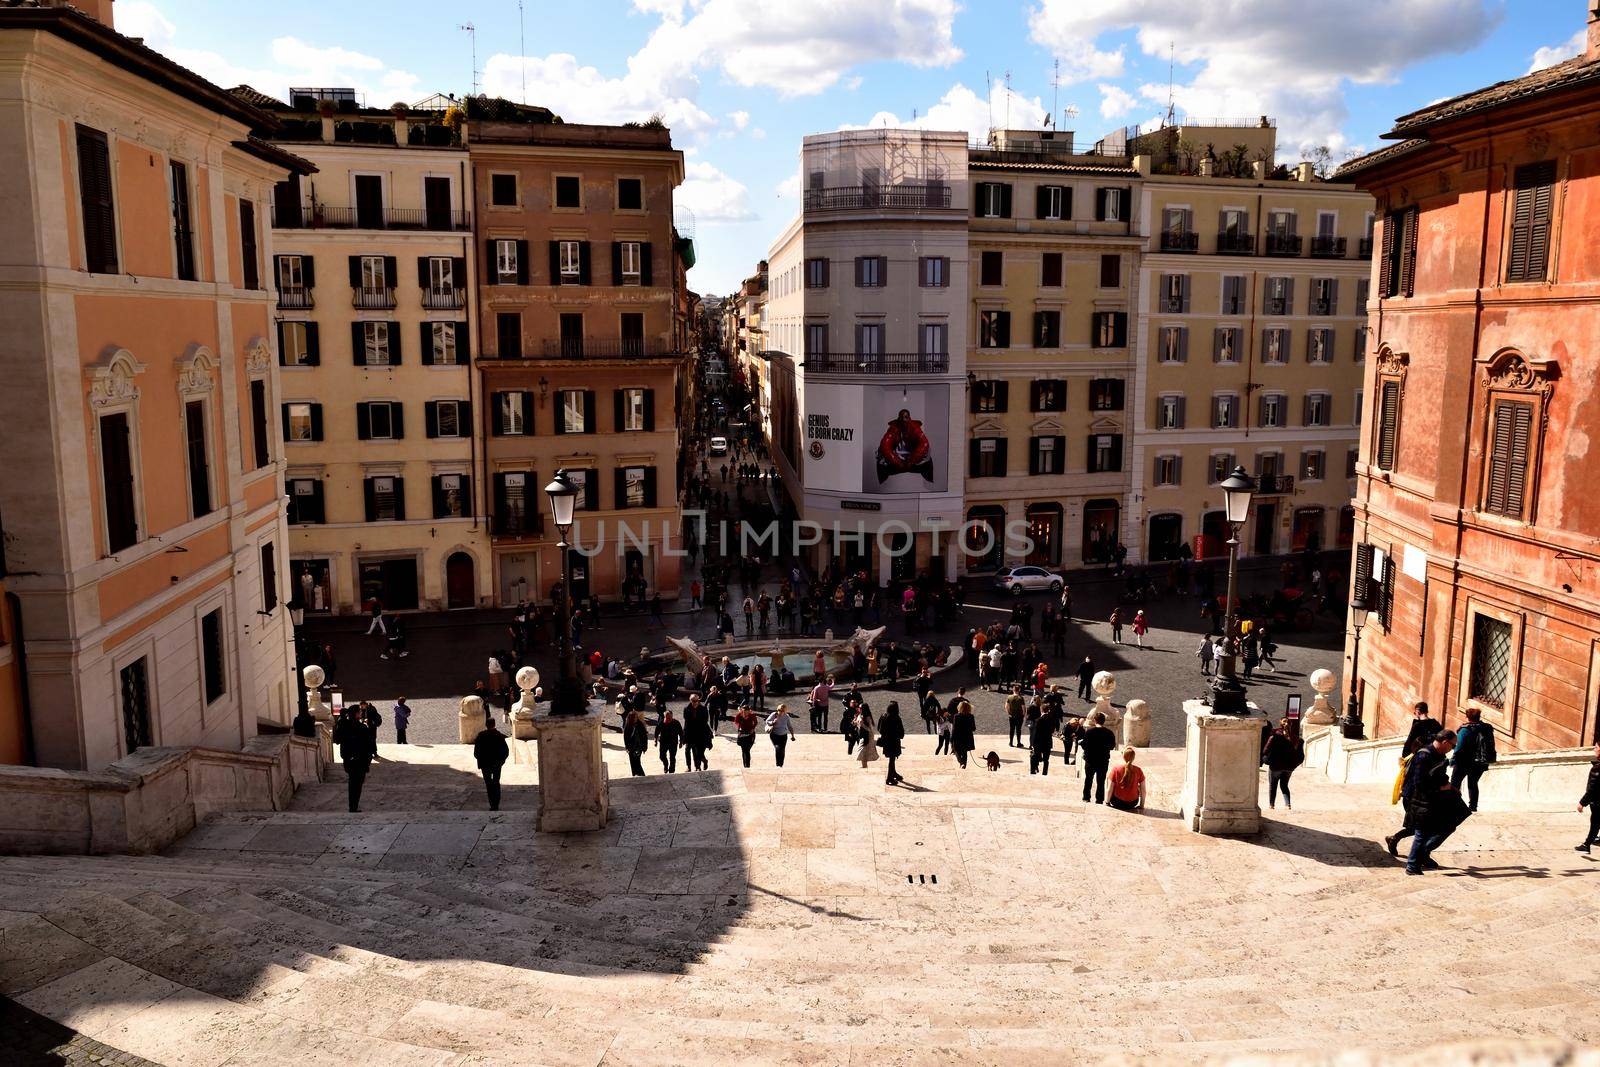 March 8th 2020, Rome, Italy: View of Piazza di Spagna with few tourists because of the coronavirus by silentstock639